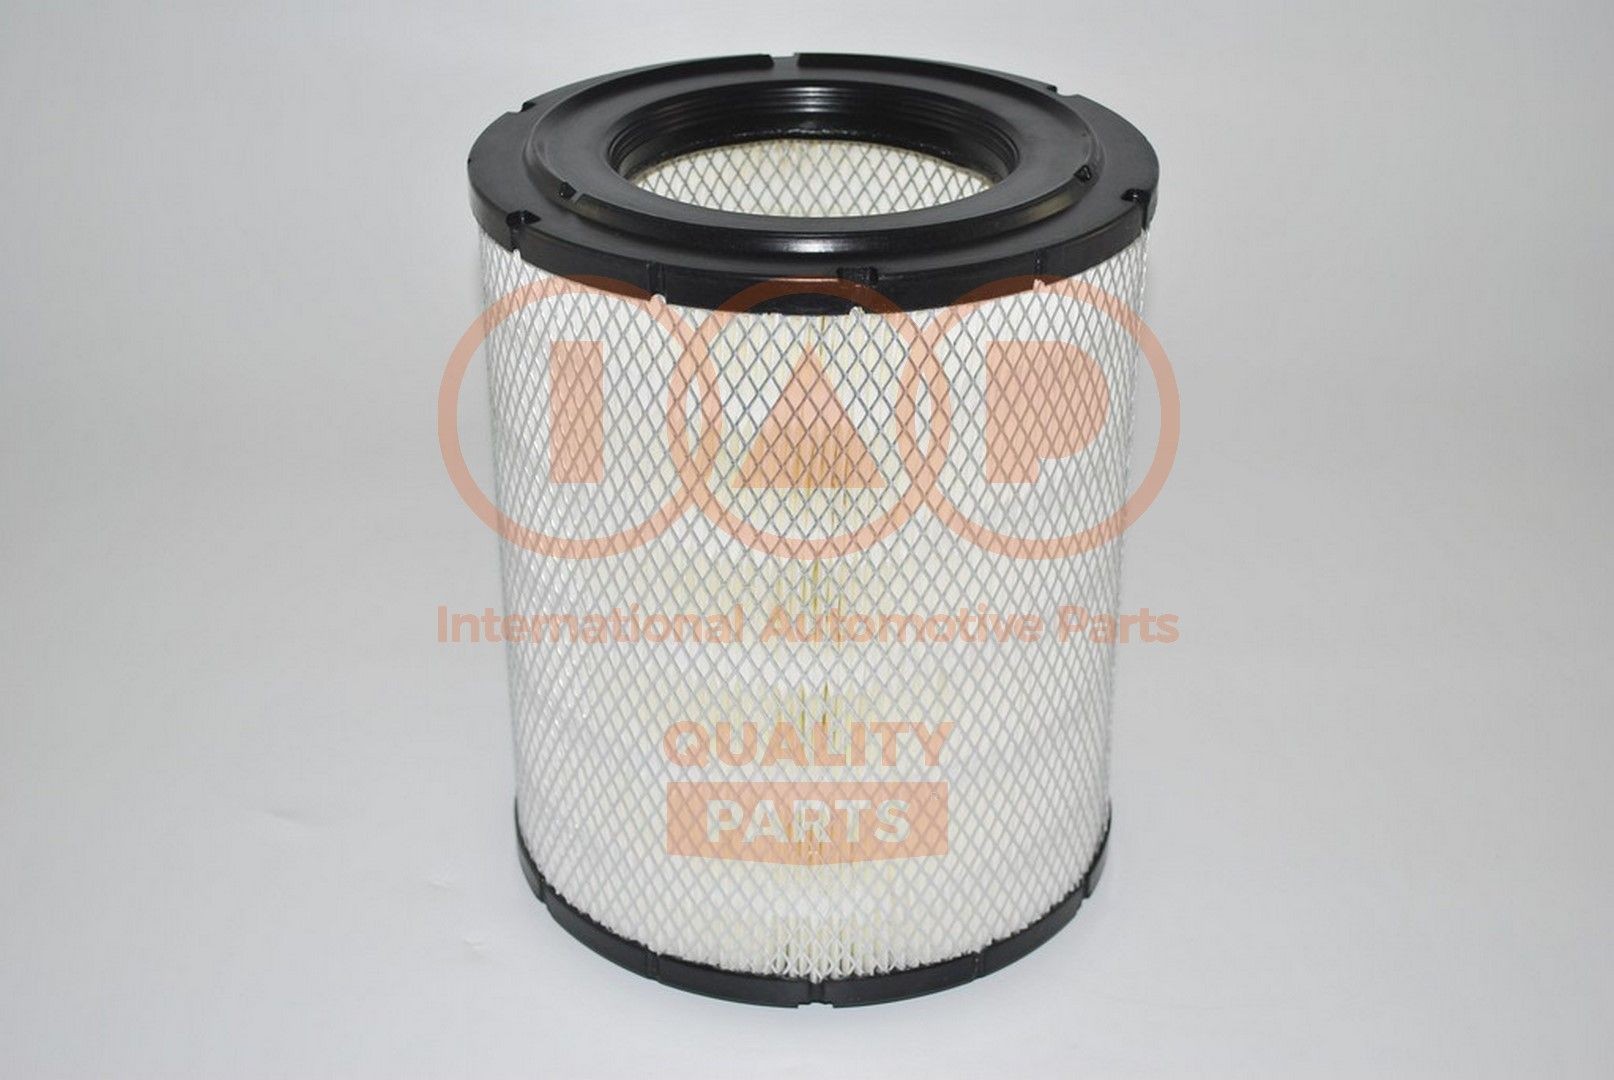 IAP QUALITY PARTS 121-09093 Luchtfilter 8981772710